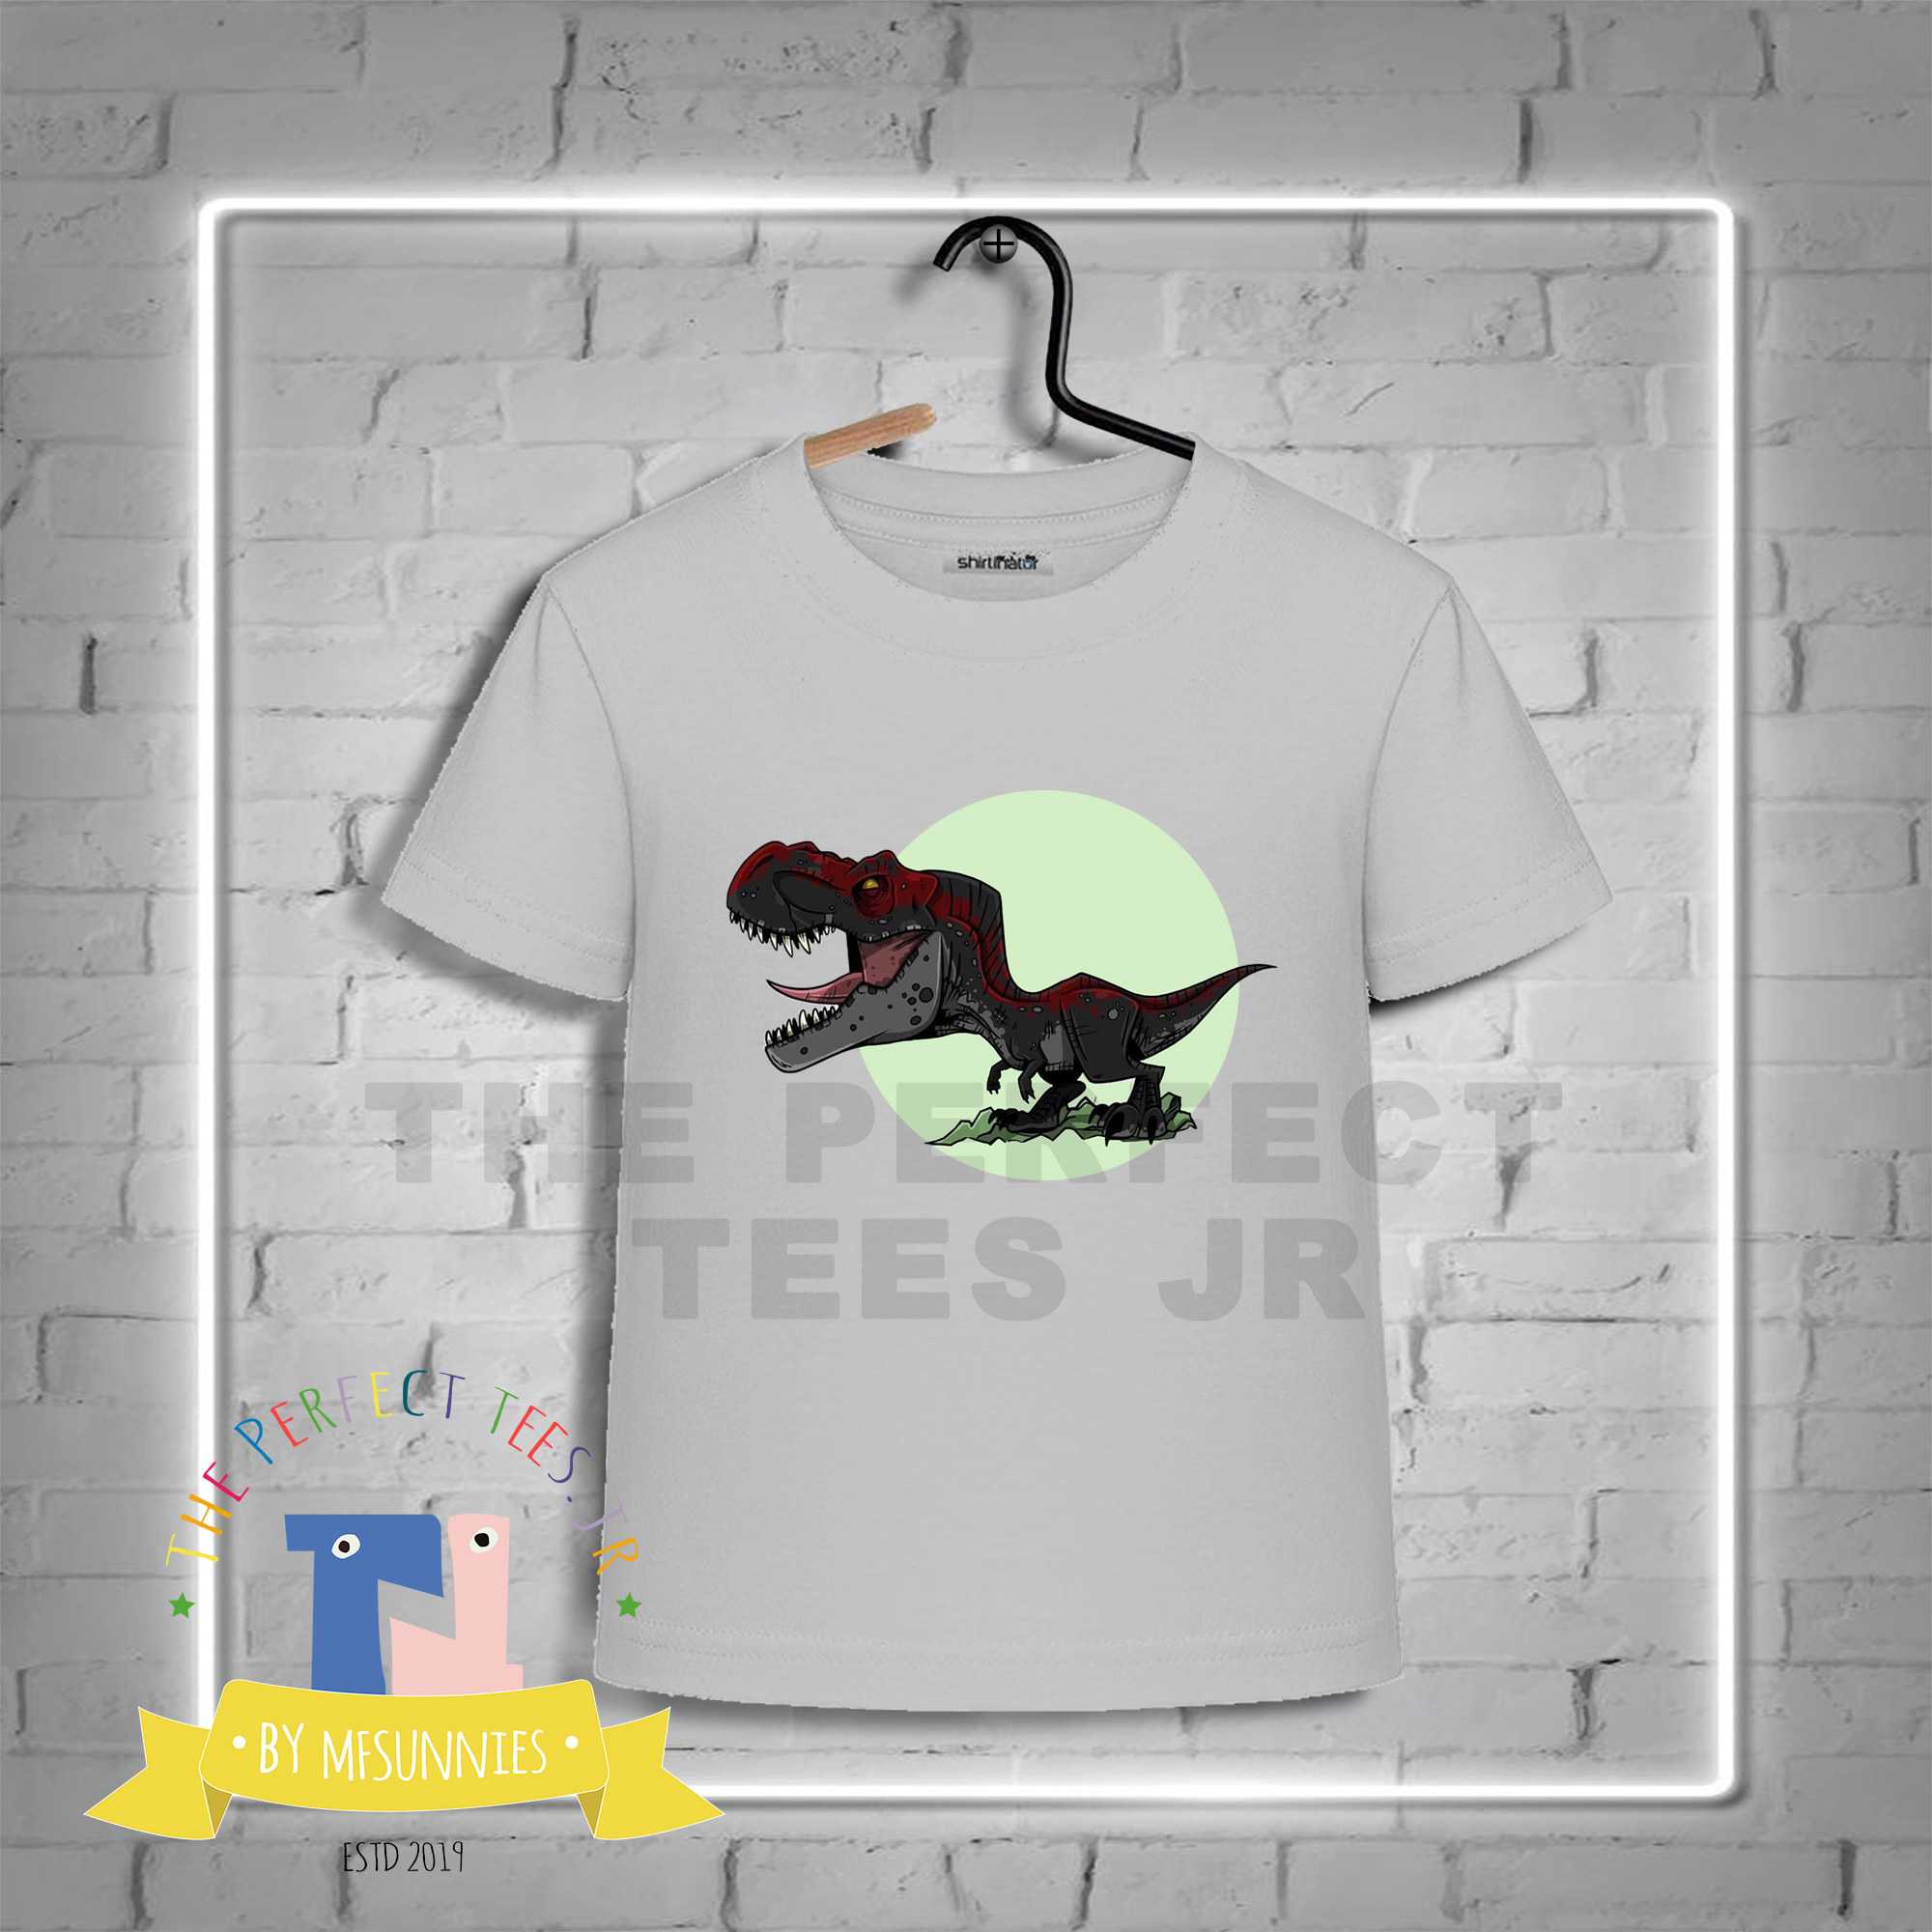 Boys Shirts For Sale T Shirts For Boys Online For Sale With Great Prices Deals Lazada Com Ph - galaxy shirt girl boy roblox